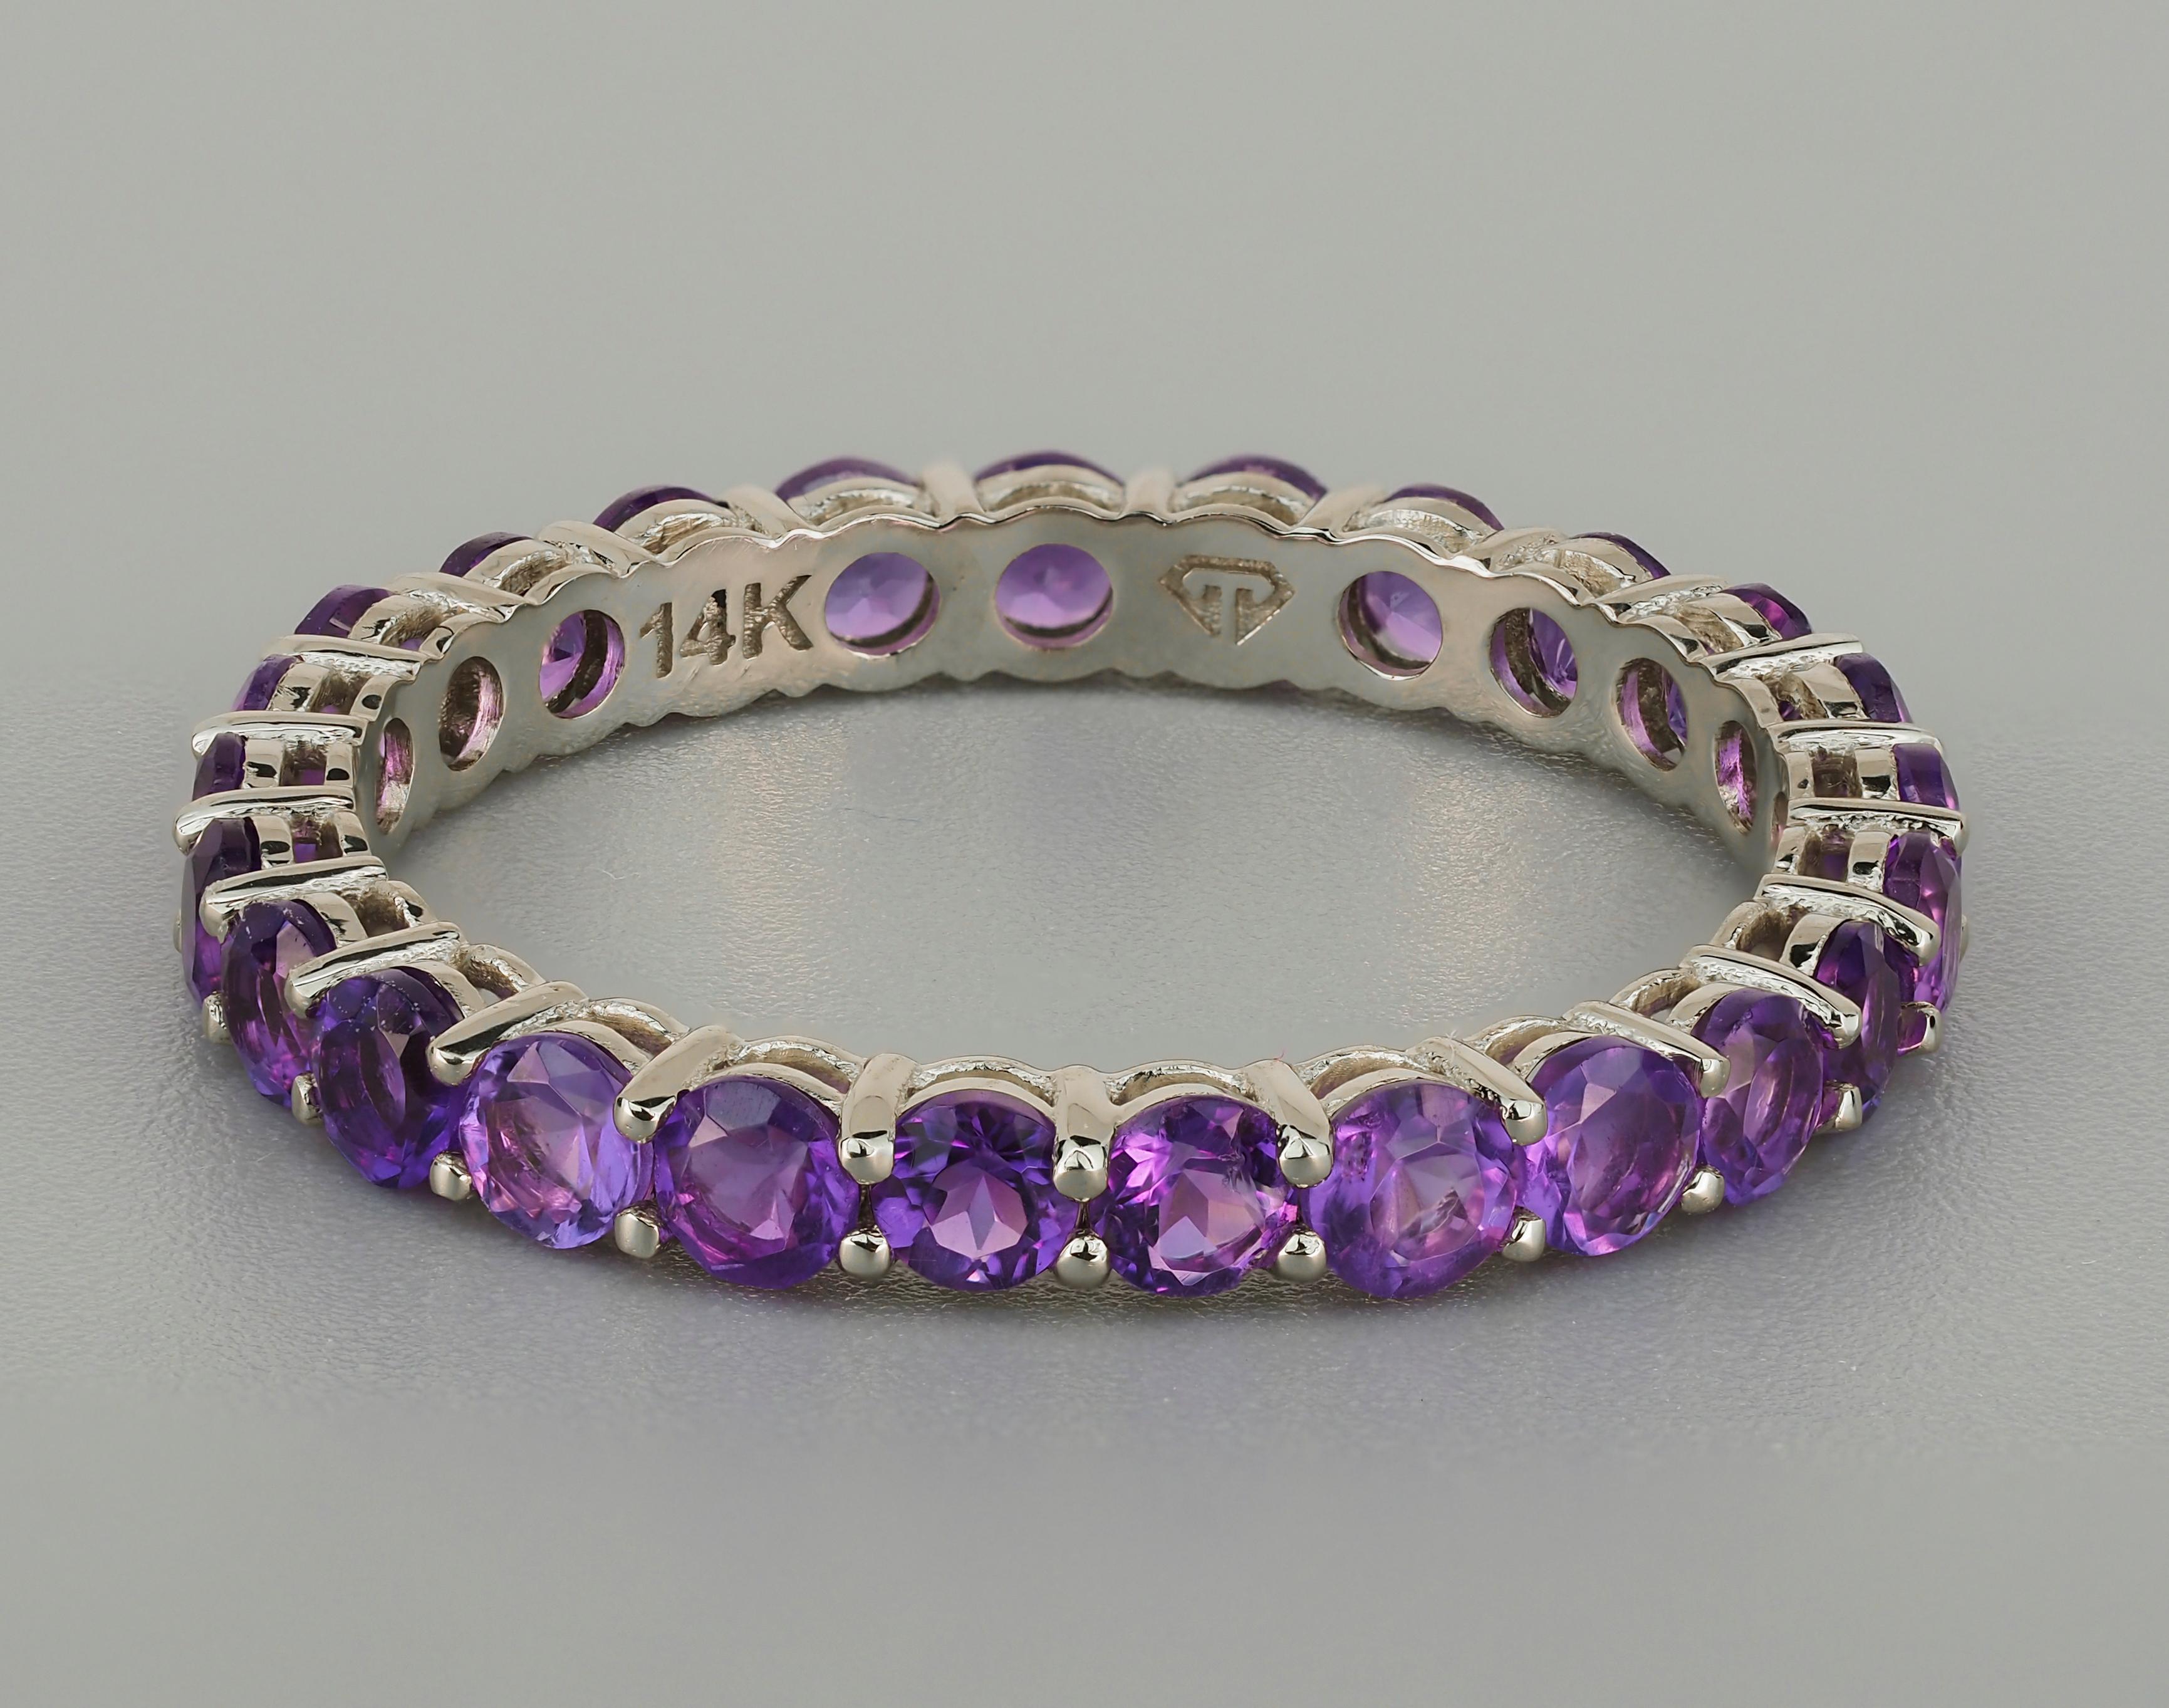 Eternity gold ring with amethysts. 

Round amethyst ring. Amethyst gold ring. Stackable eternity ring. Casual amethyst ring. 

Metal: 14k gold
Weight: 2.25 g. depends from size

Set with amethysts.
Round shape, violet color, aprx 2.6 ct total (25